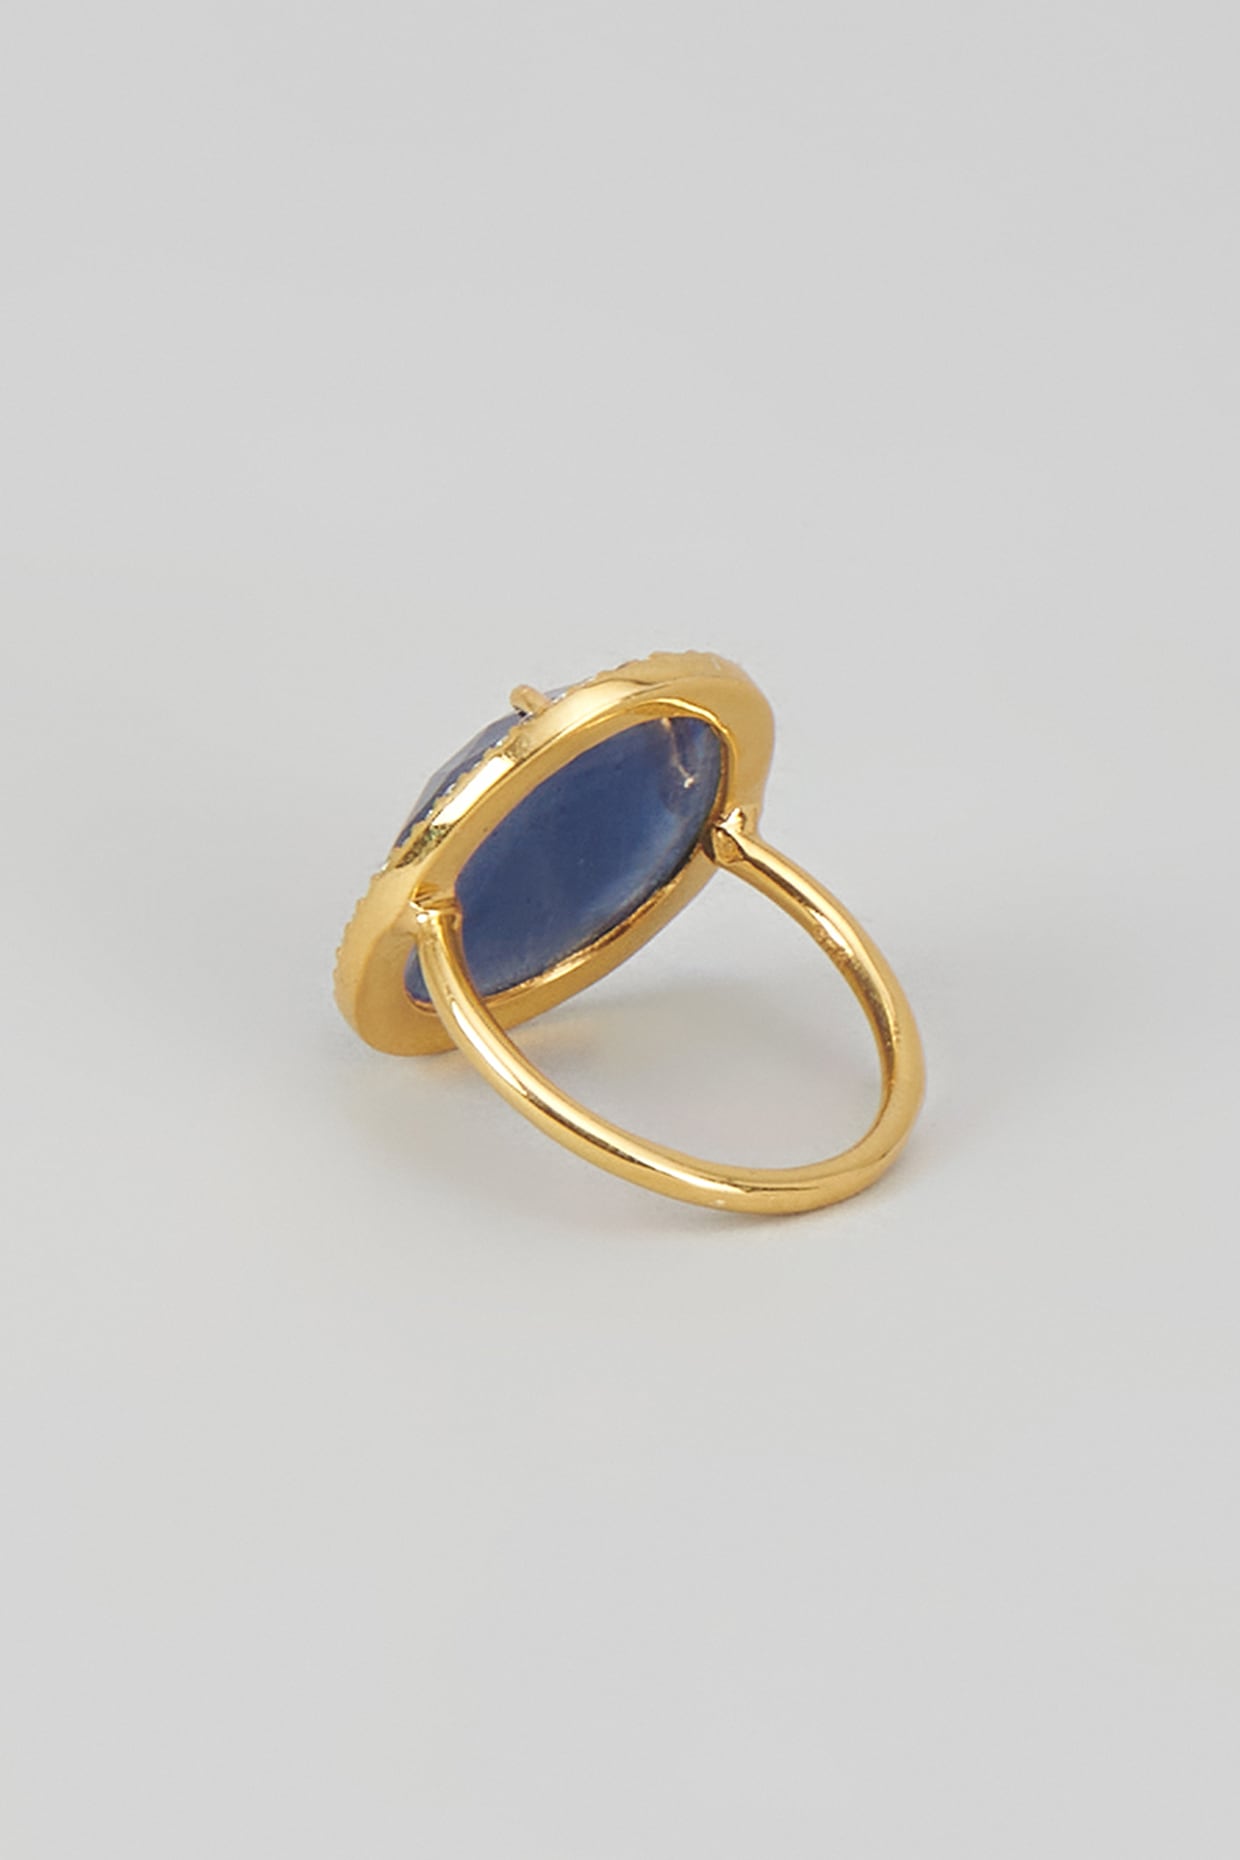 Gold ring with blue stone stock image. Image of beautiful - 119654213